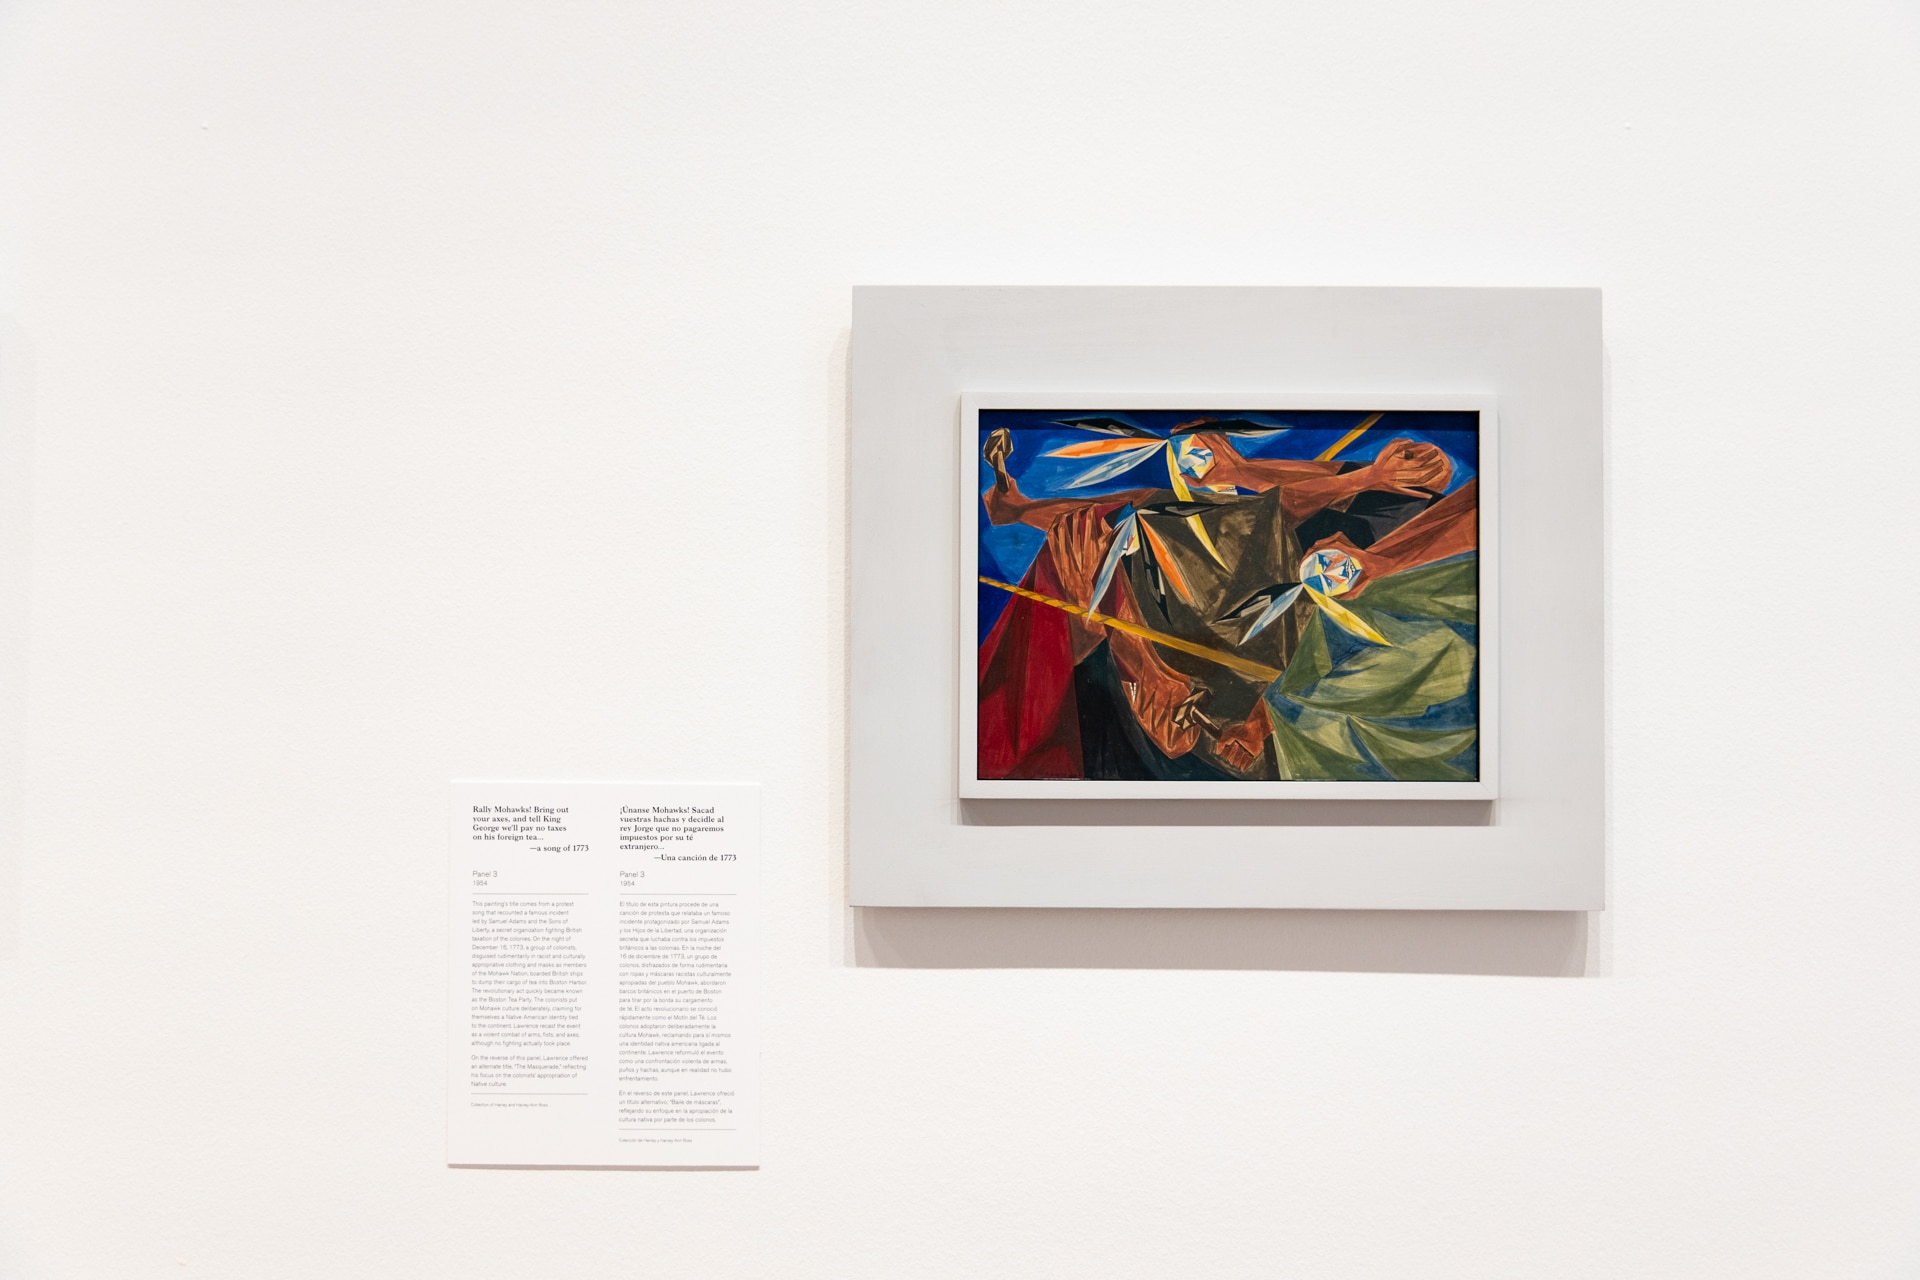 BMA Jacob Lawrence 3 1 "Jacob Lawrence: The American Struggle" retells history at the Birmingham Museum of Art